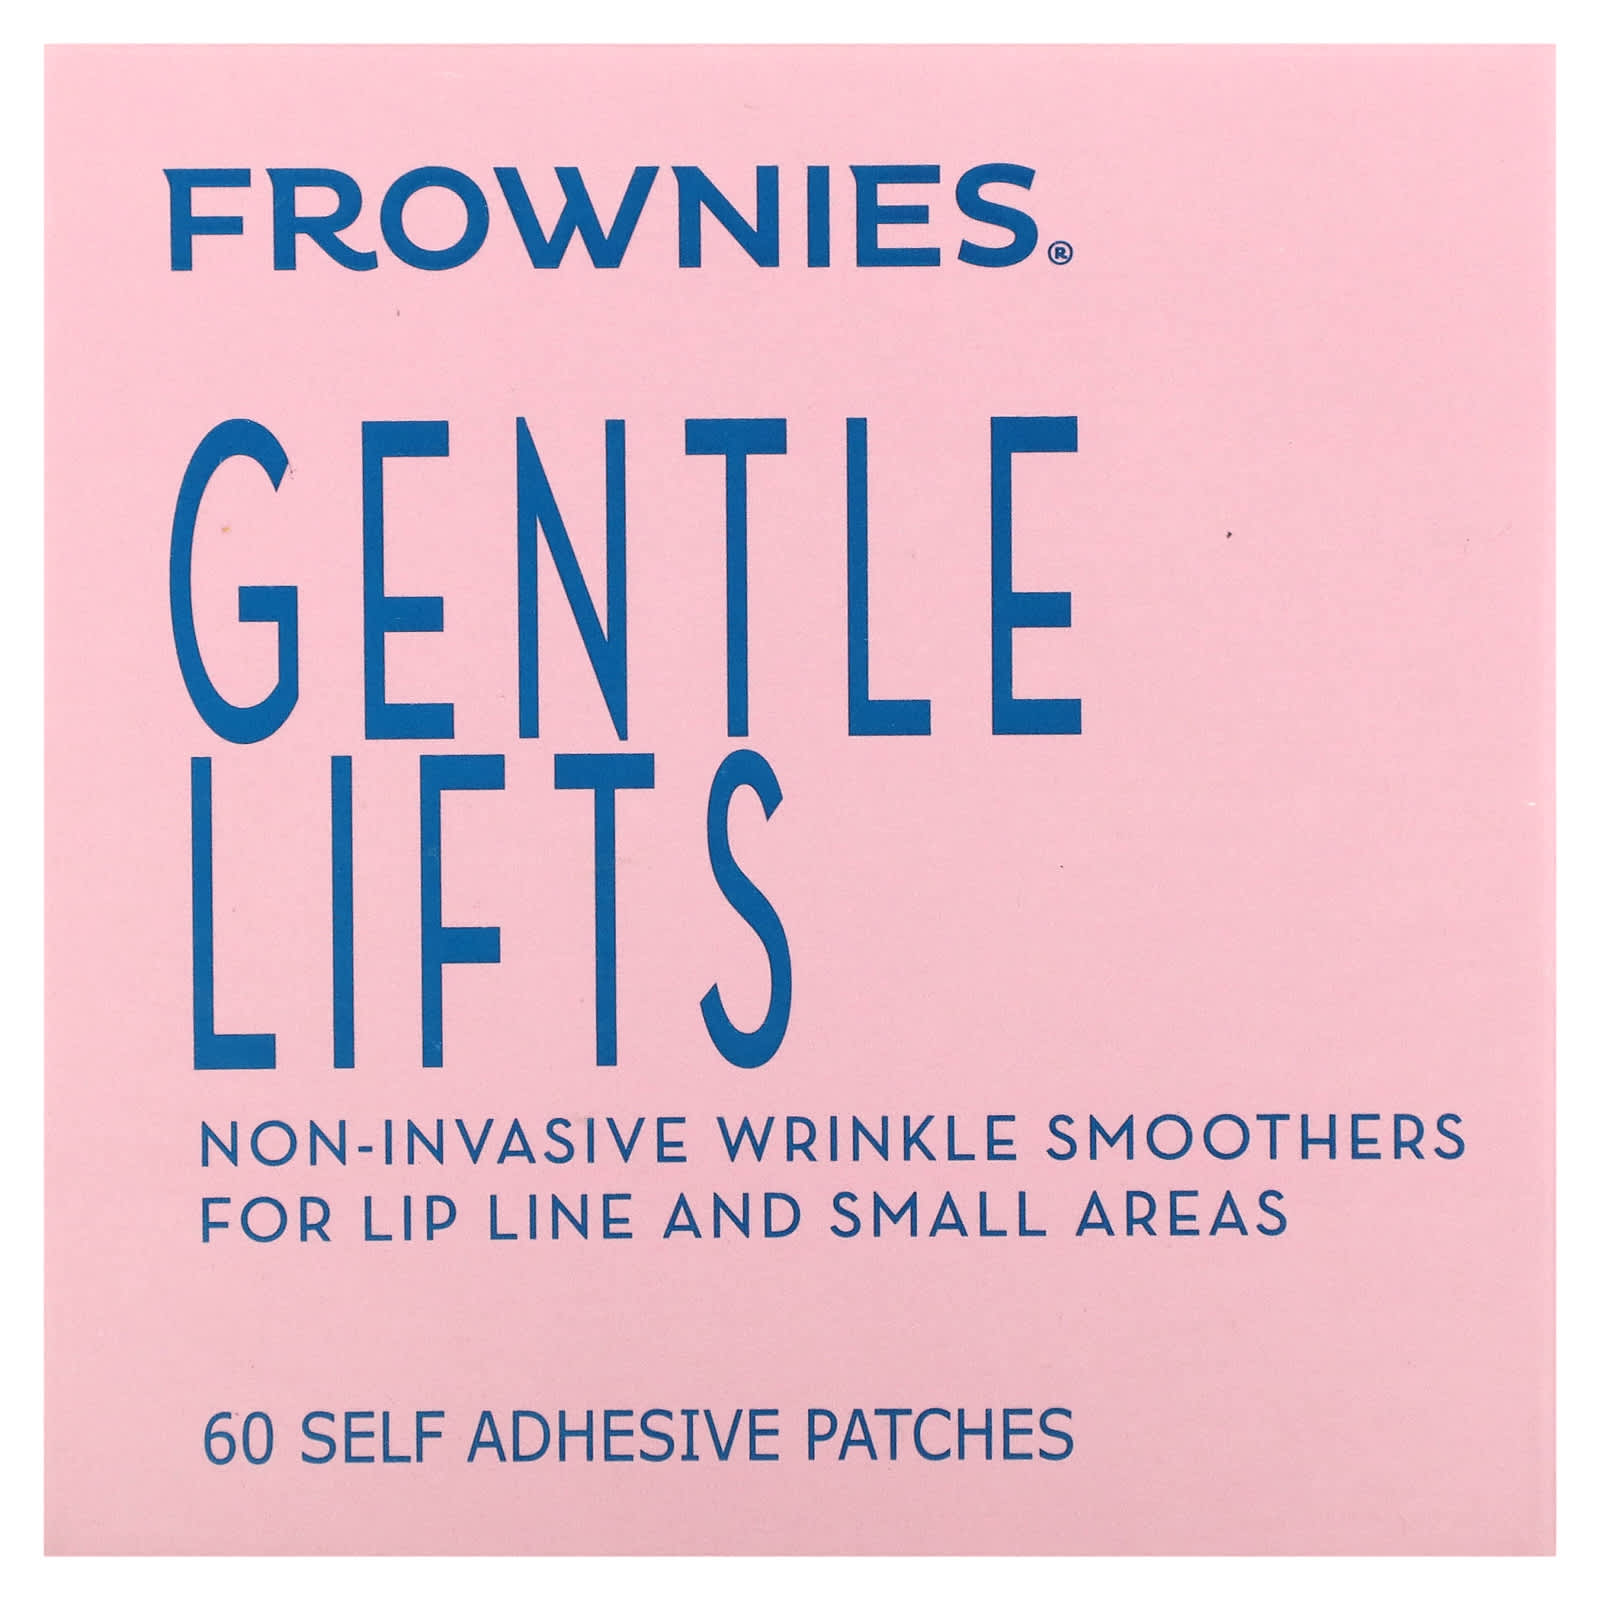 ORIGINAL FROWNIES GENTLE LIFTS FOR FINE LINES AROUND THE LIPS AND MOUTH NEW 